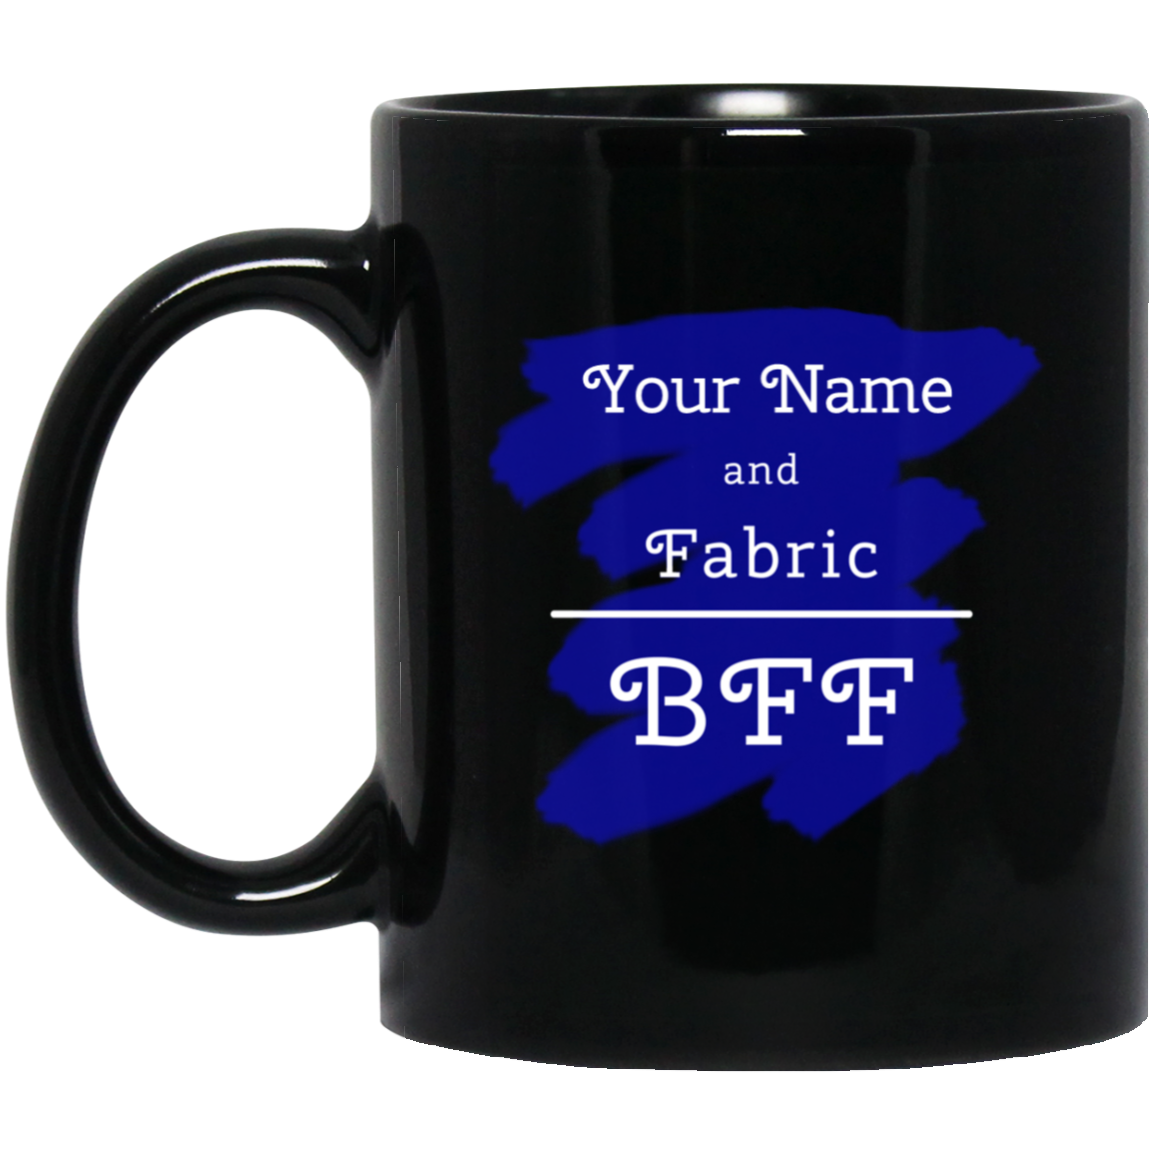 YOUR NAME and Fabric BFF - Personalized Black Mugs